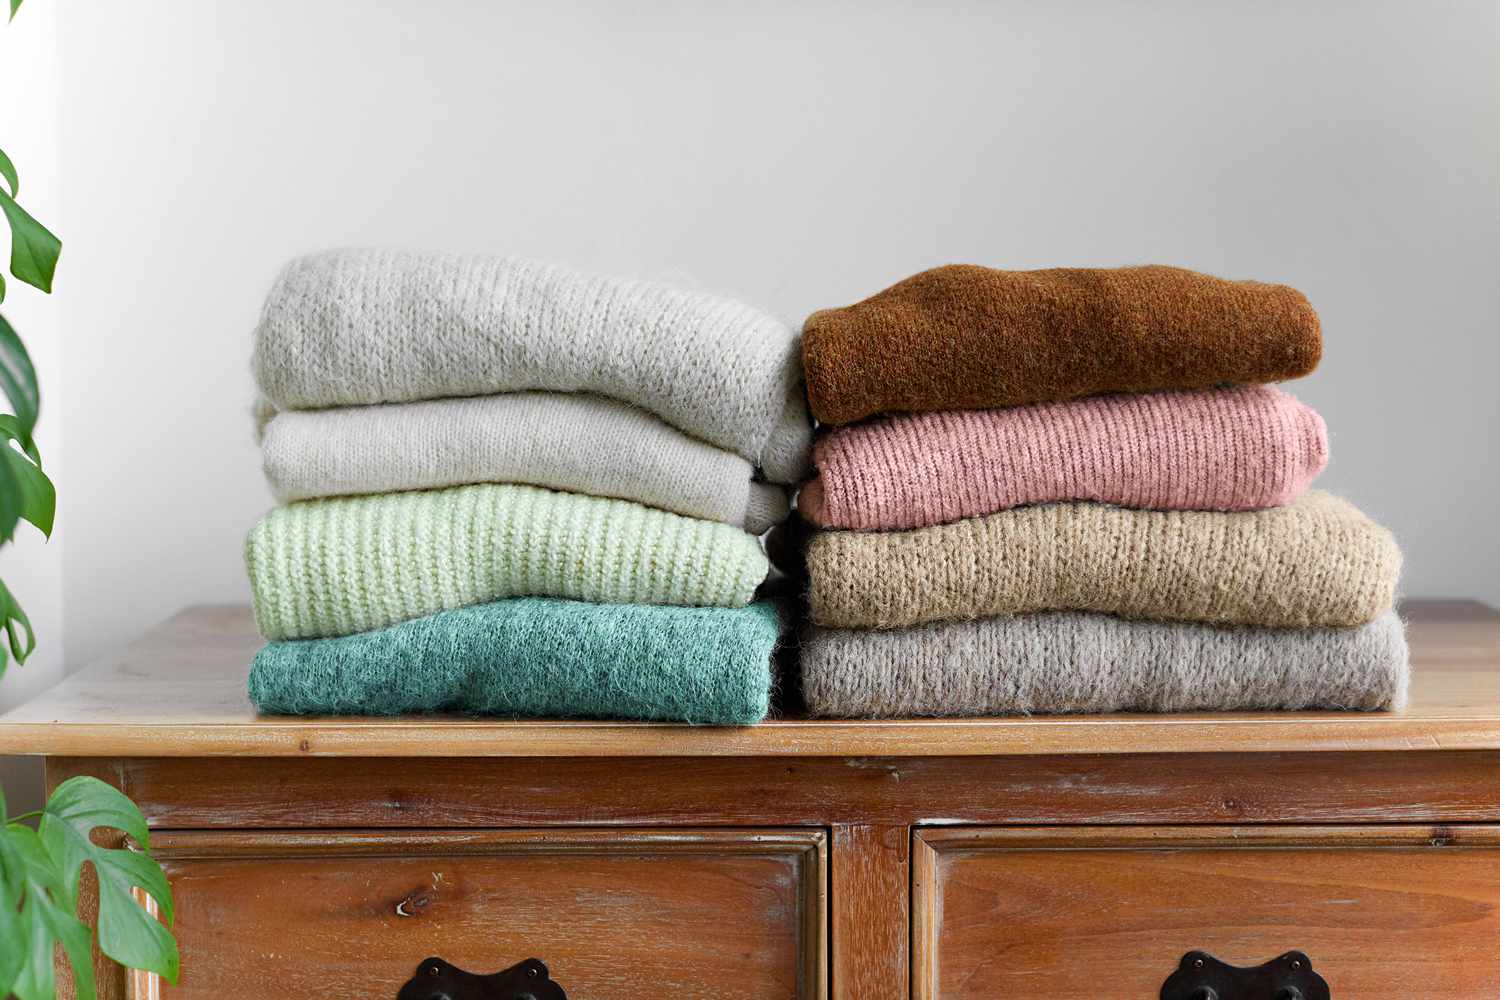 How To Store Cardigans Without Wrinkles